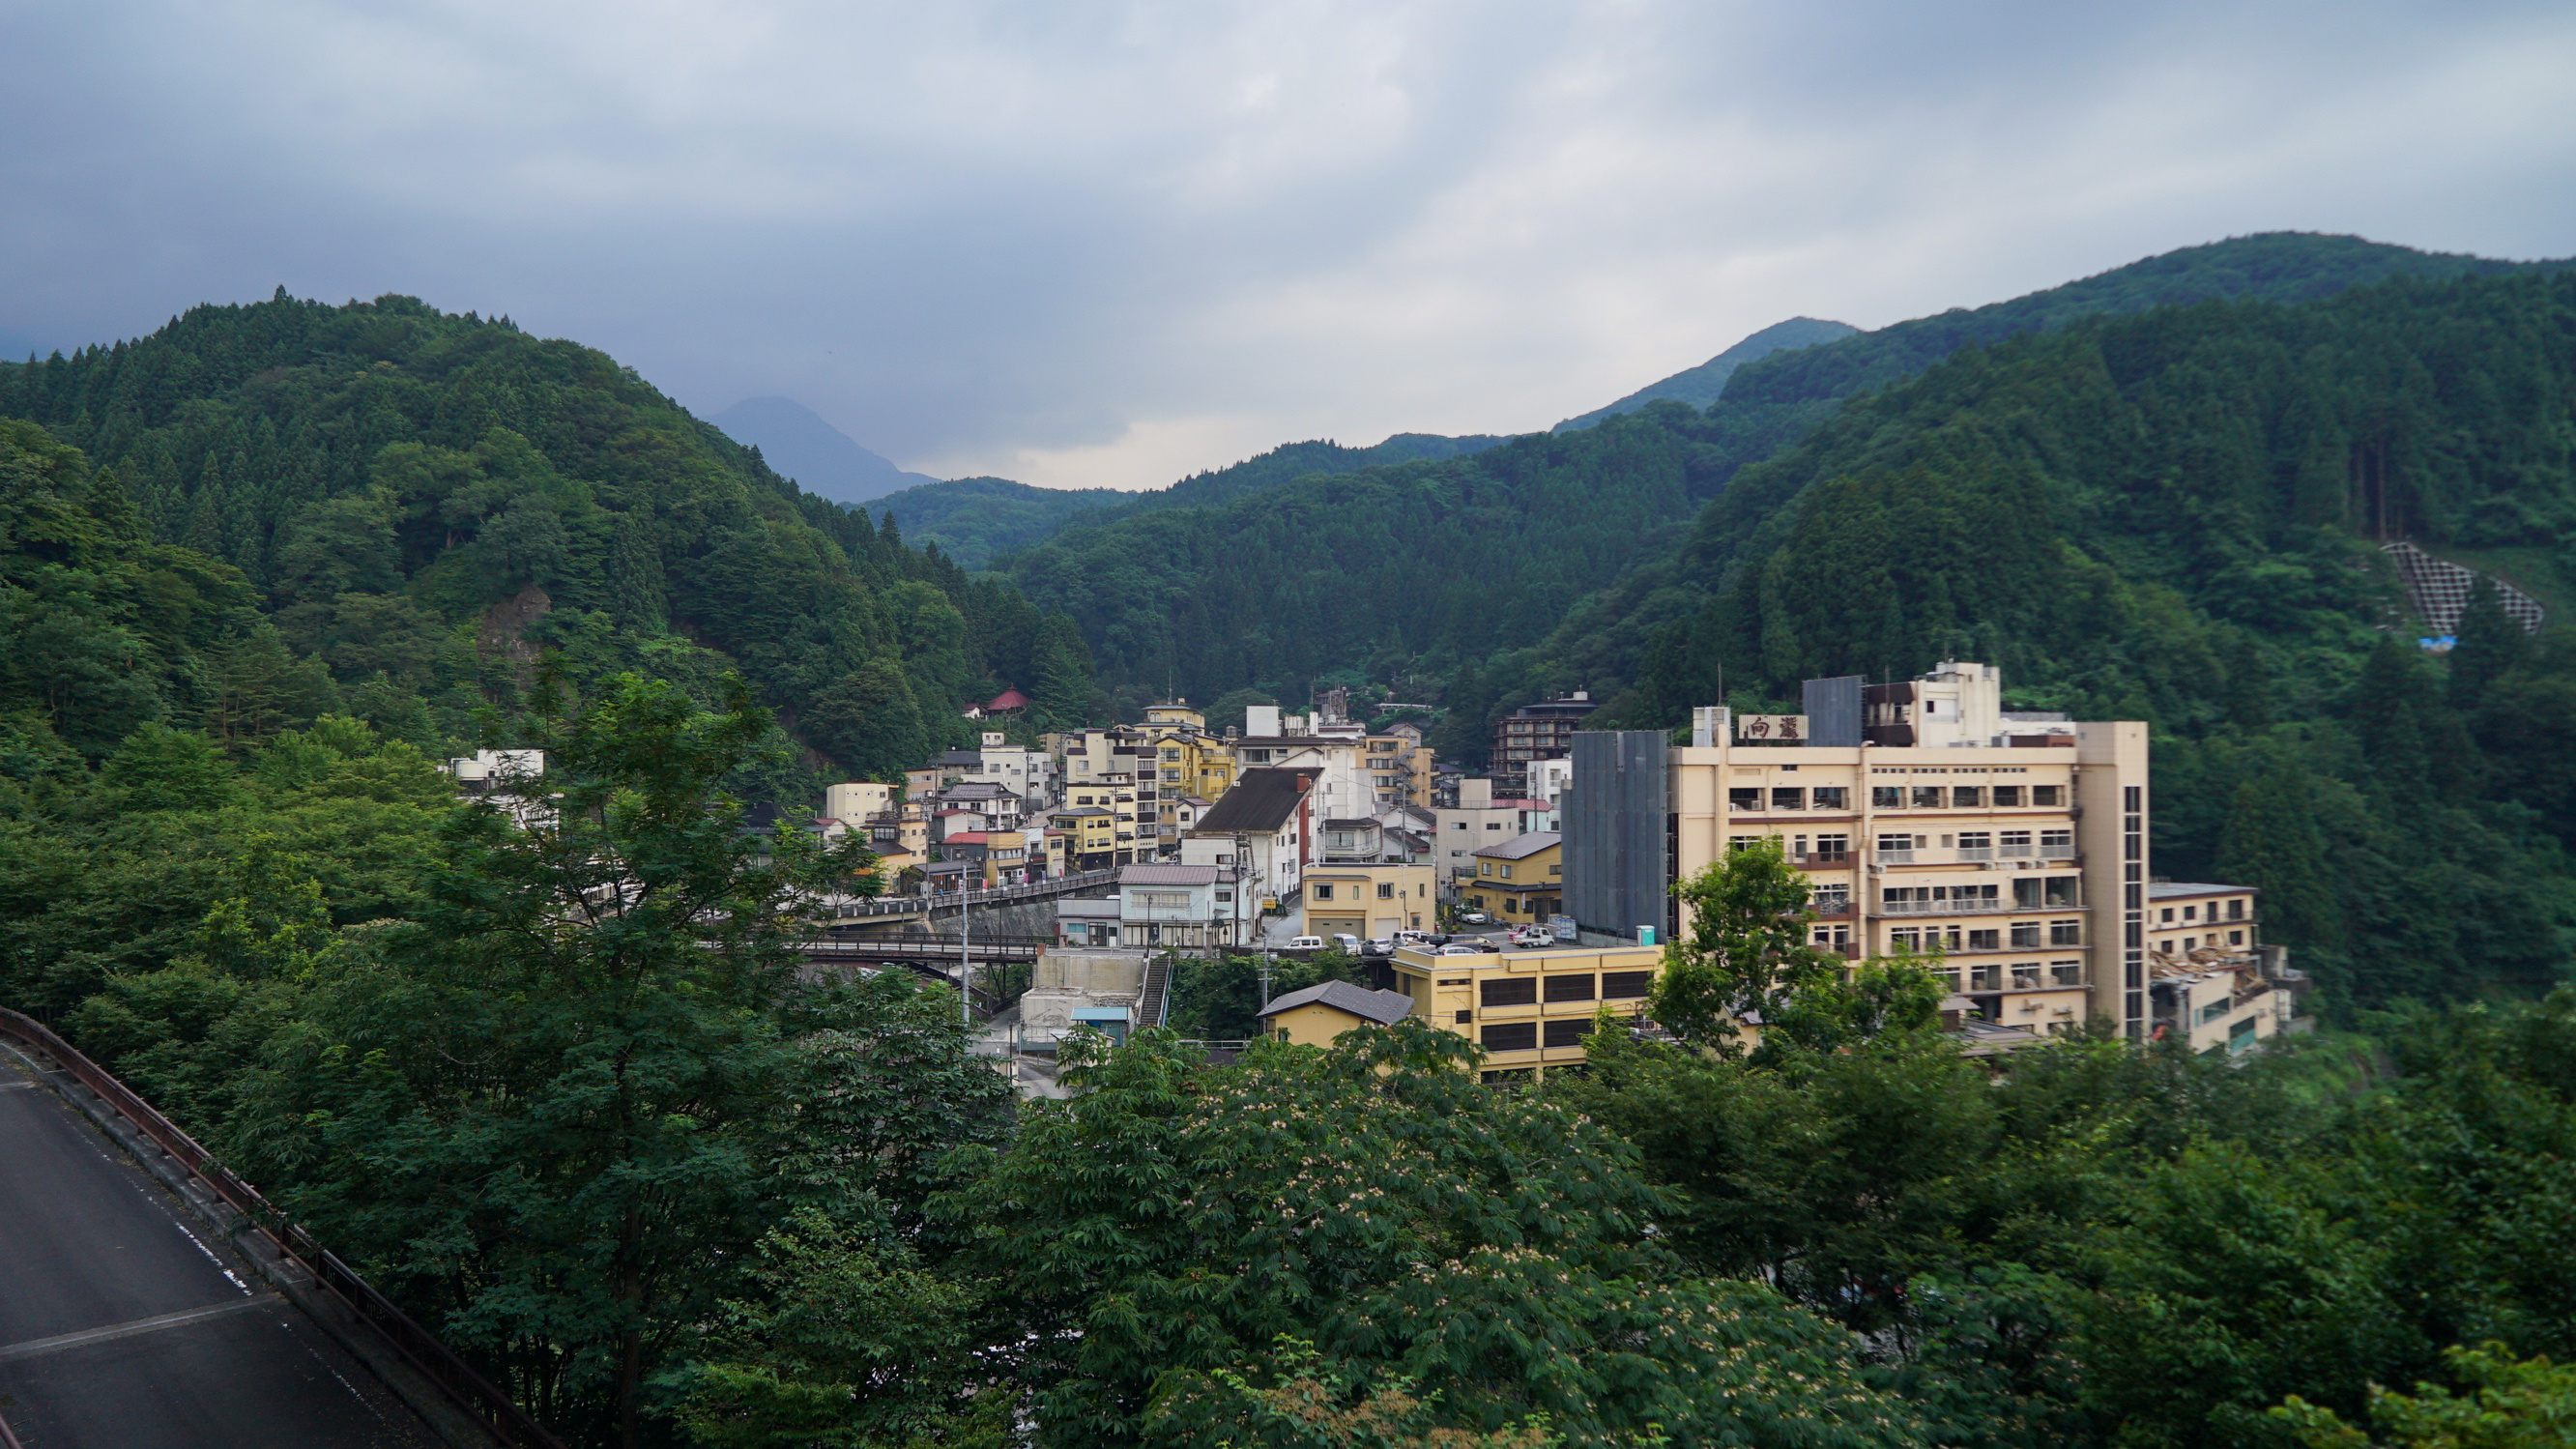 The town of Tsuchiyu Onsen Machi is seen embedded among the mountains